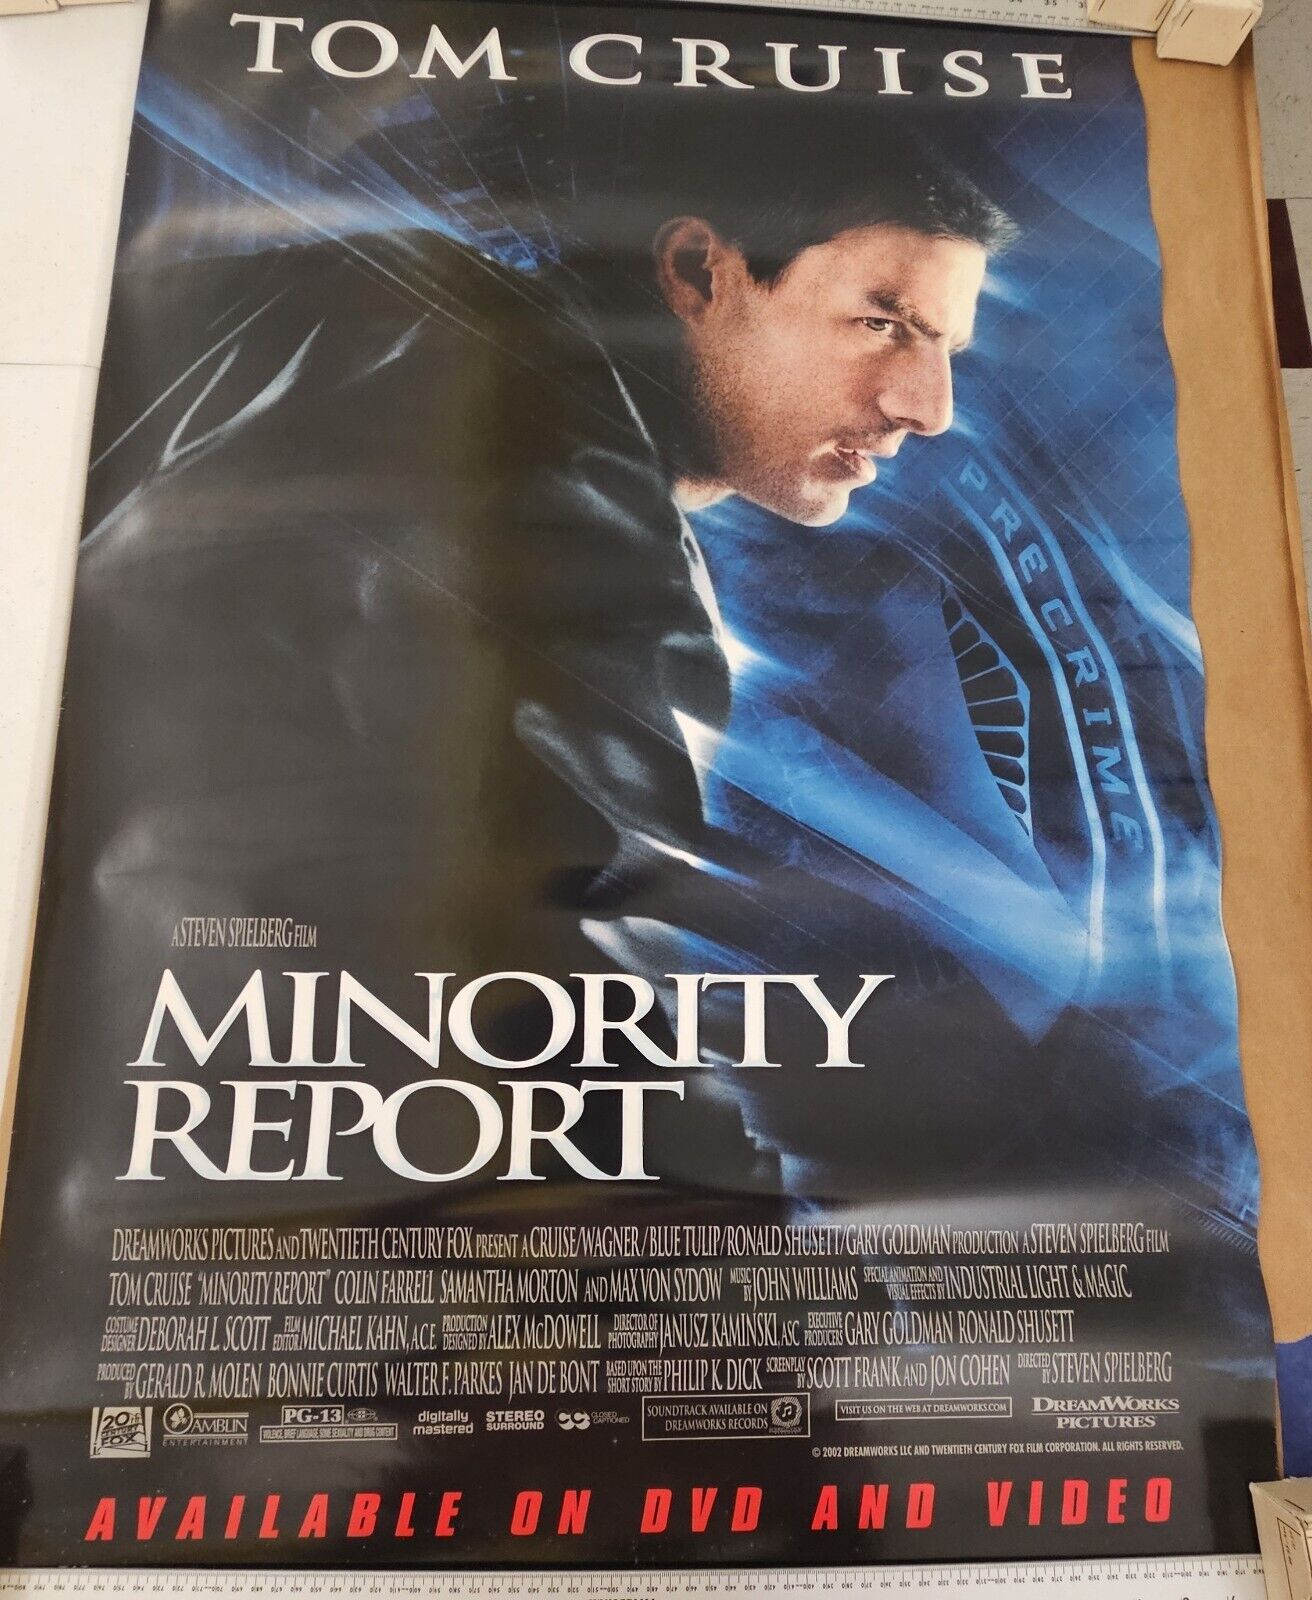 Tom Cruise  In Minority Report  DVD promotional Movie poster